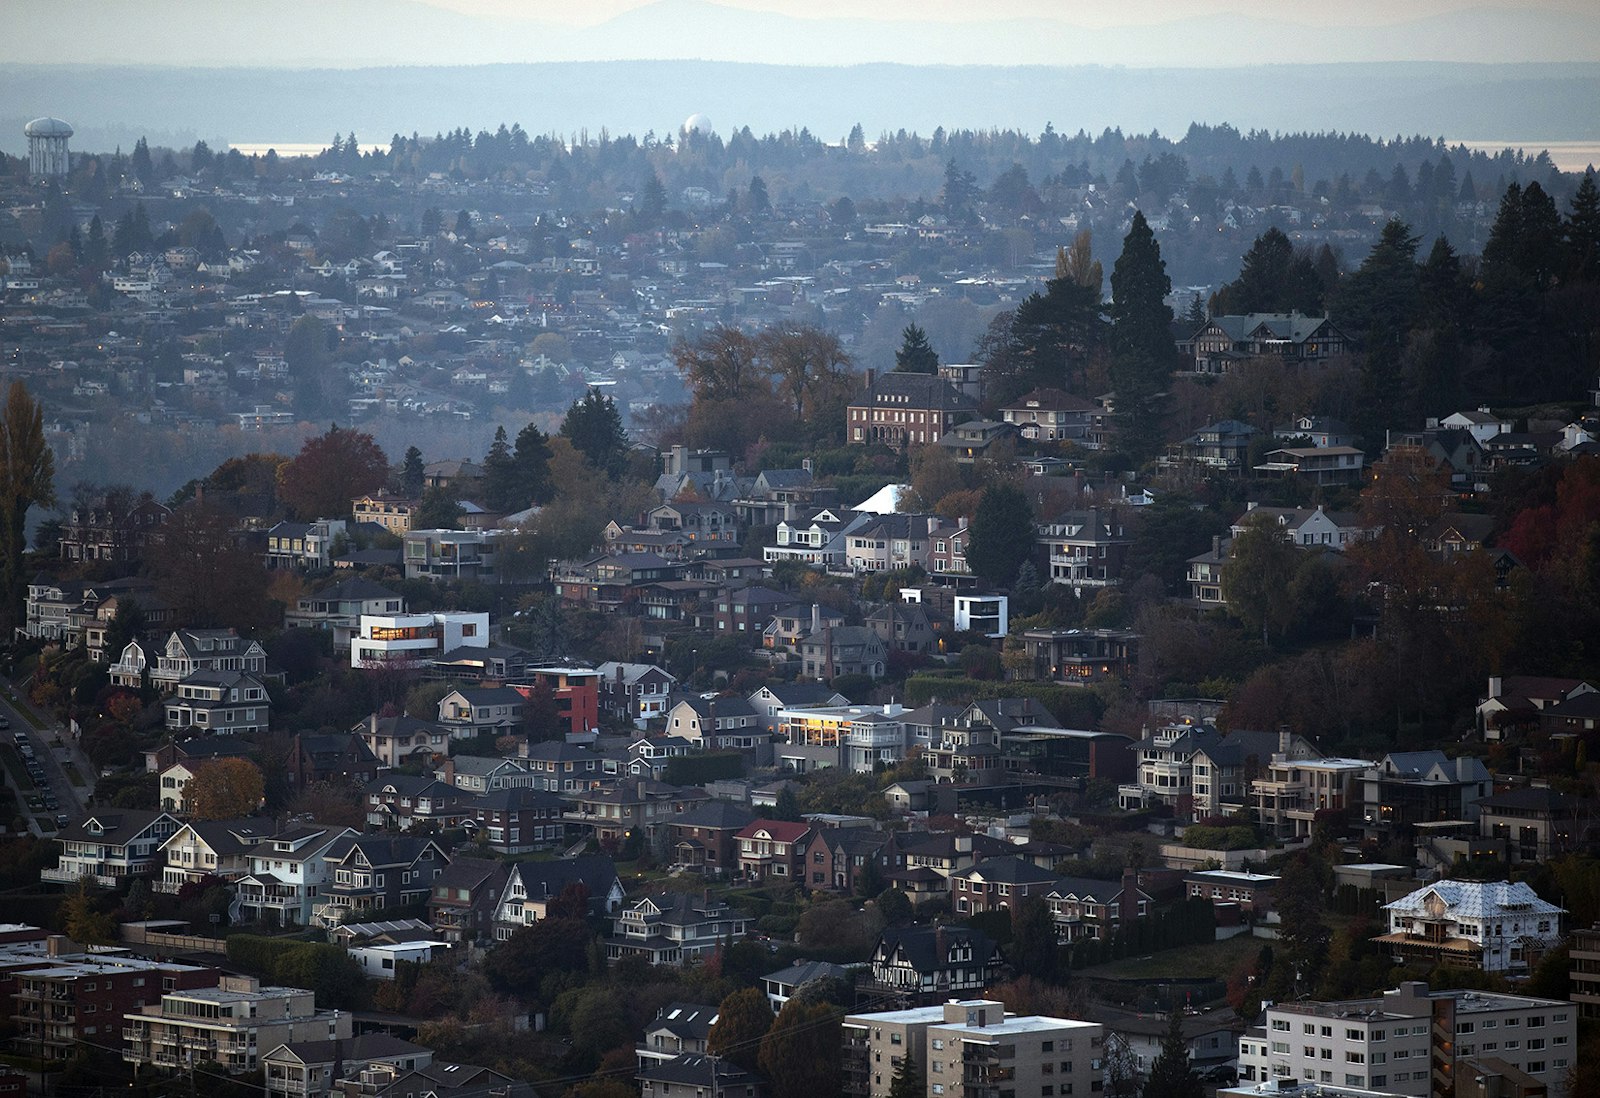 View of Seattle neighborhoods from a viewpoint. 